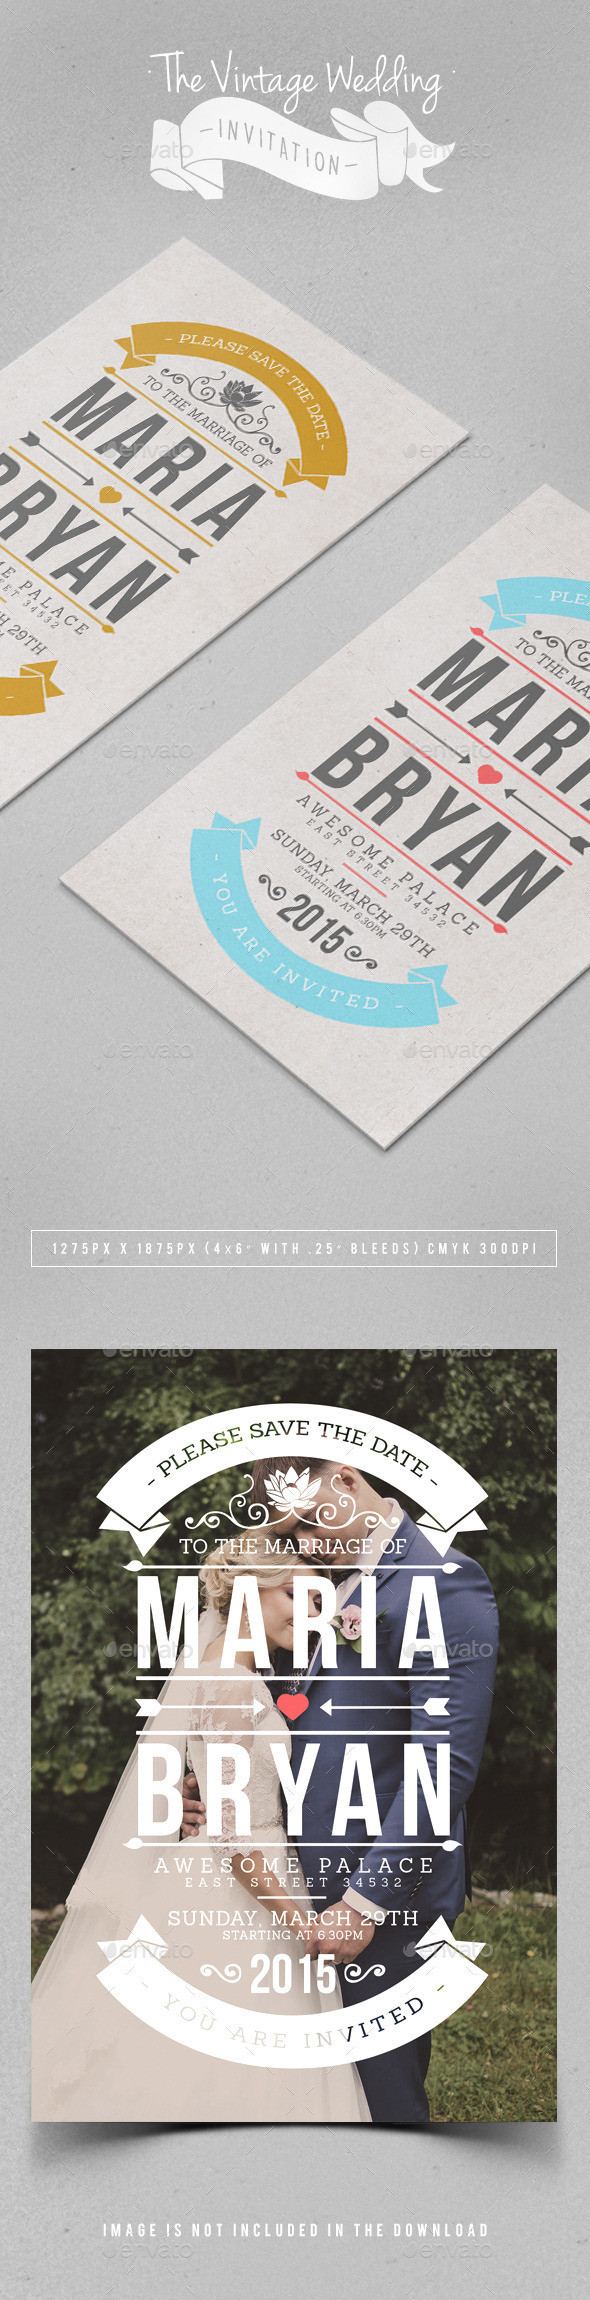 The vintage wedding invitation preview